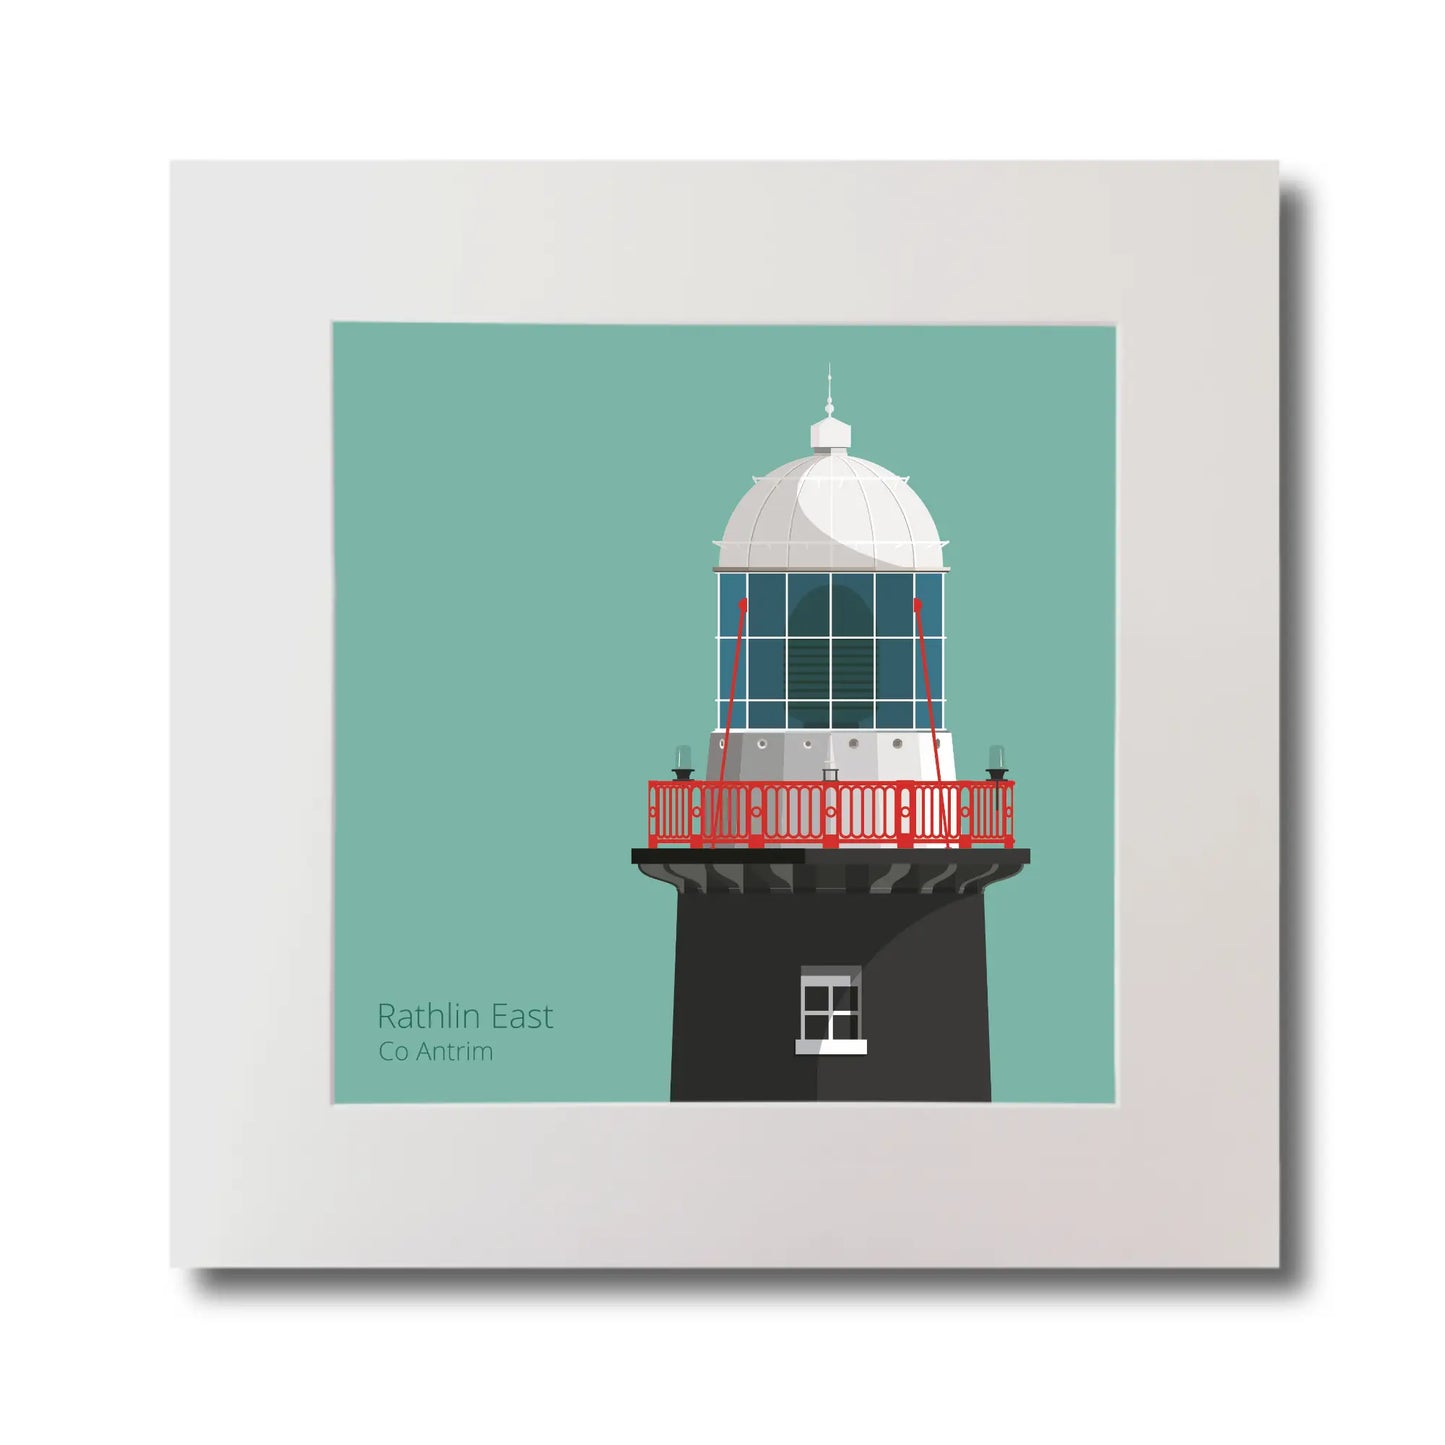 Illustration of Rathlin East lighthouse on an ocean green background, mounted and measuring 30x30cm.